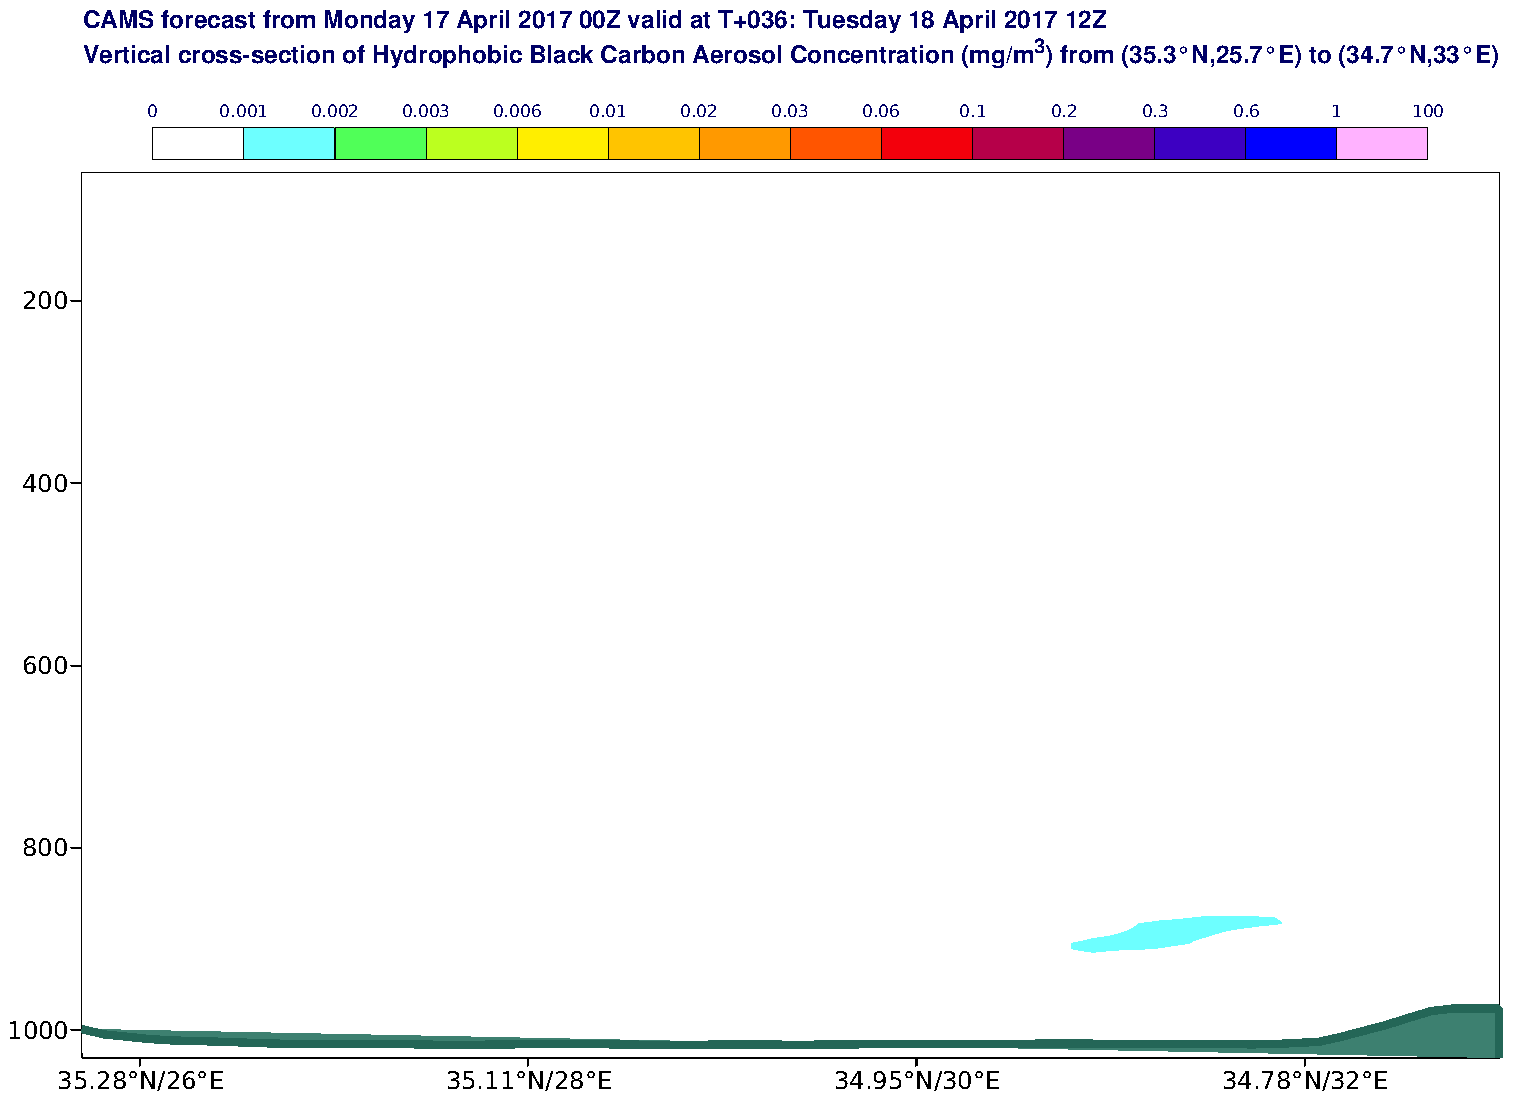 Vertical cross-section of Hydrophobic Black Carbon Aerosol Concentration (mg/m3) valid at T36 - 2017-04-18 12:00